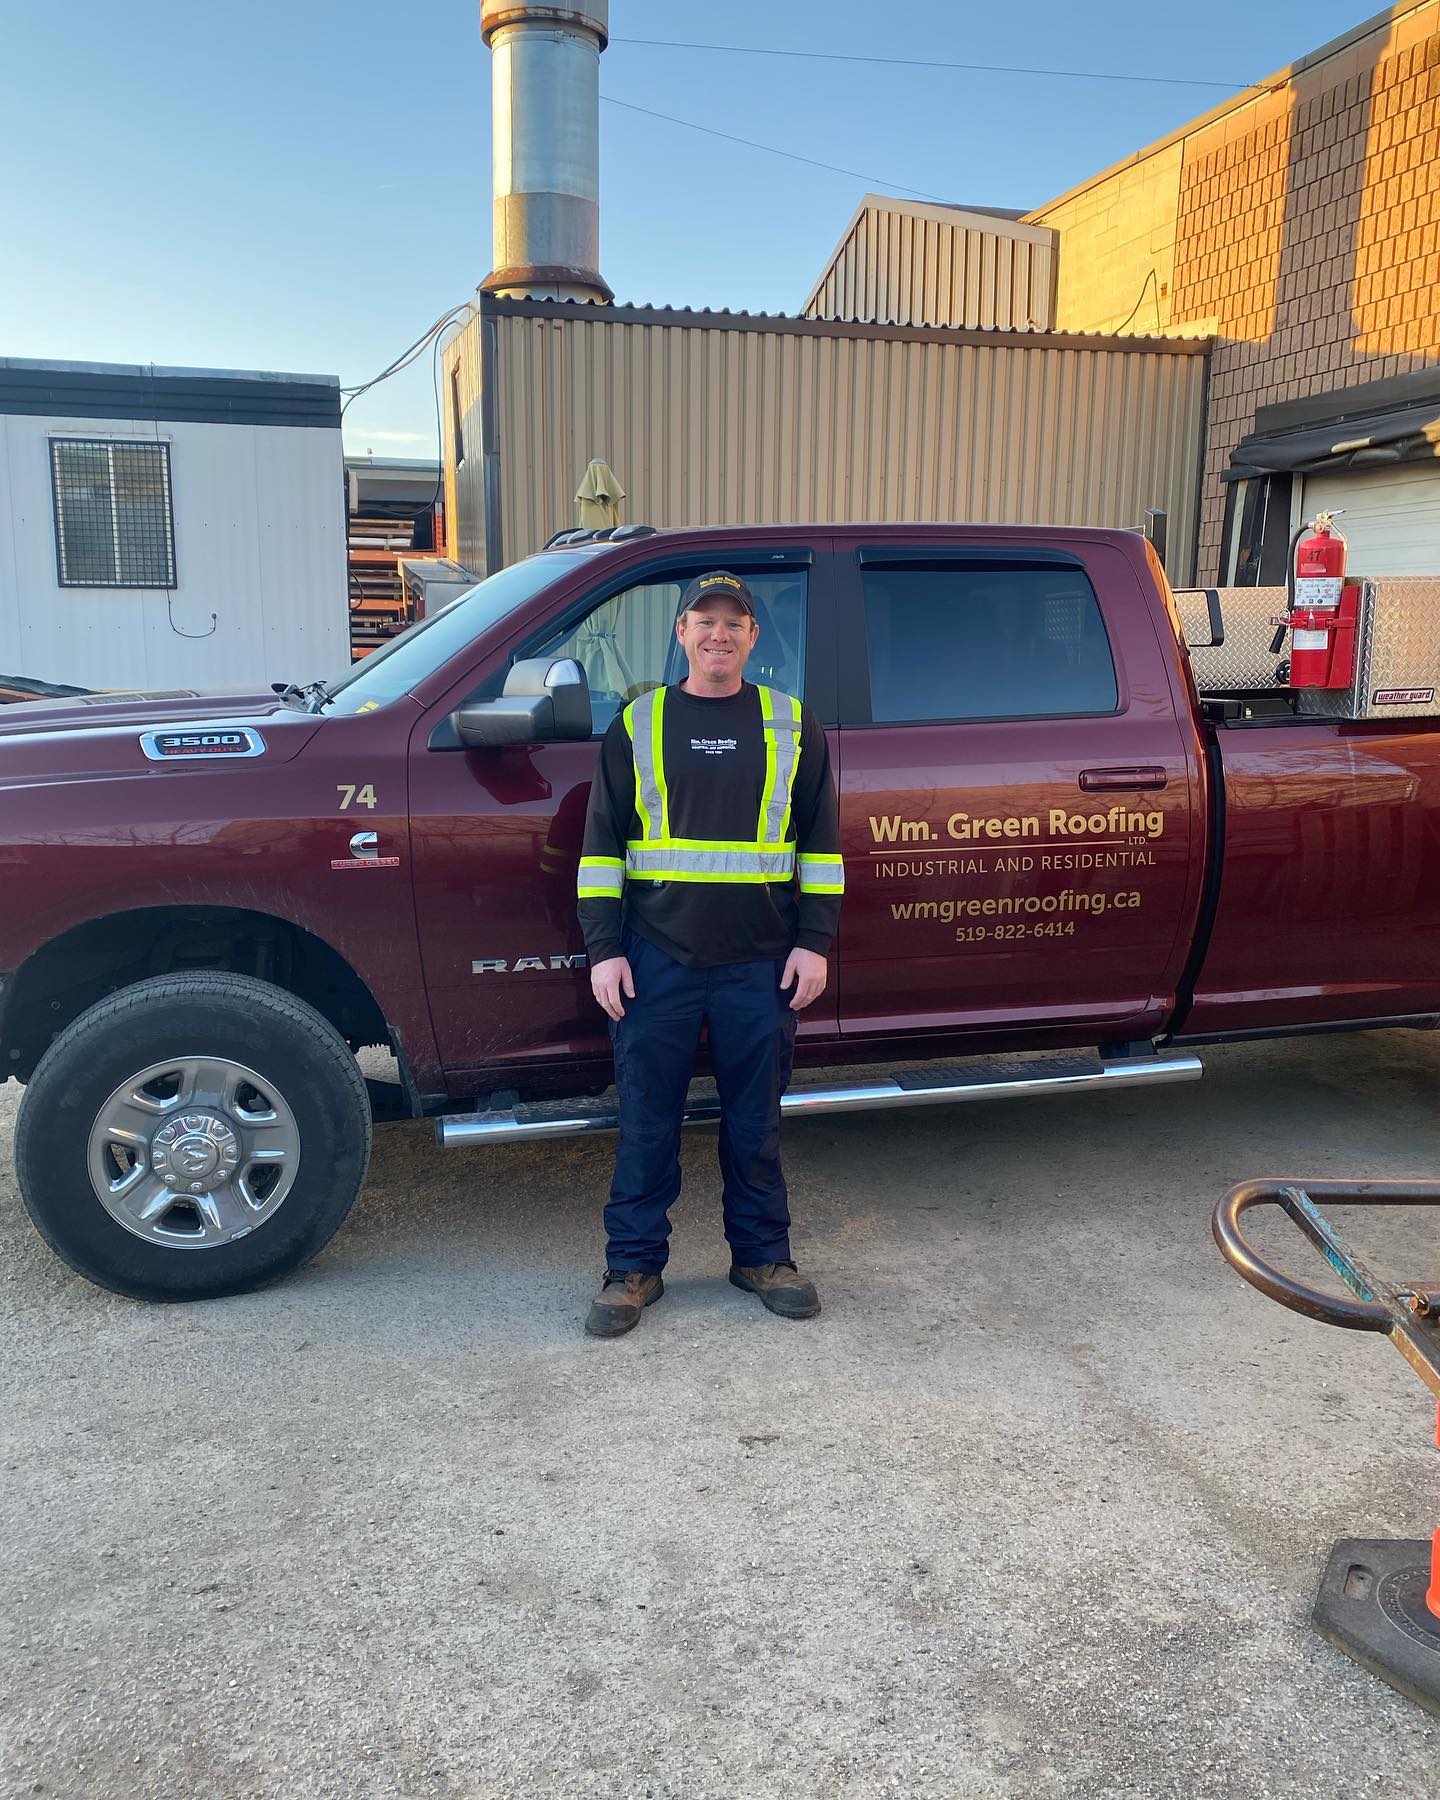 Congrats to Ben on achieving the highest marks in the class the last two years of the @conestogacollege @thinkconestoga Roofer Apprenticeship Program! 📚⚒️
.
.
.
#apprenticeship #trades #roofing #conestogacollege #continuededucation #guelphbusiness